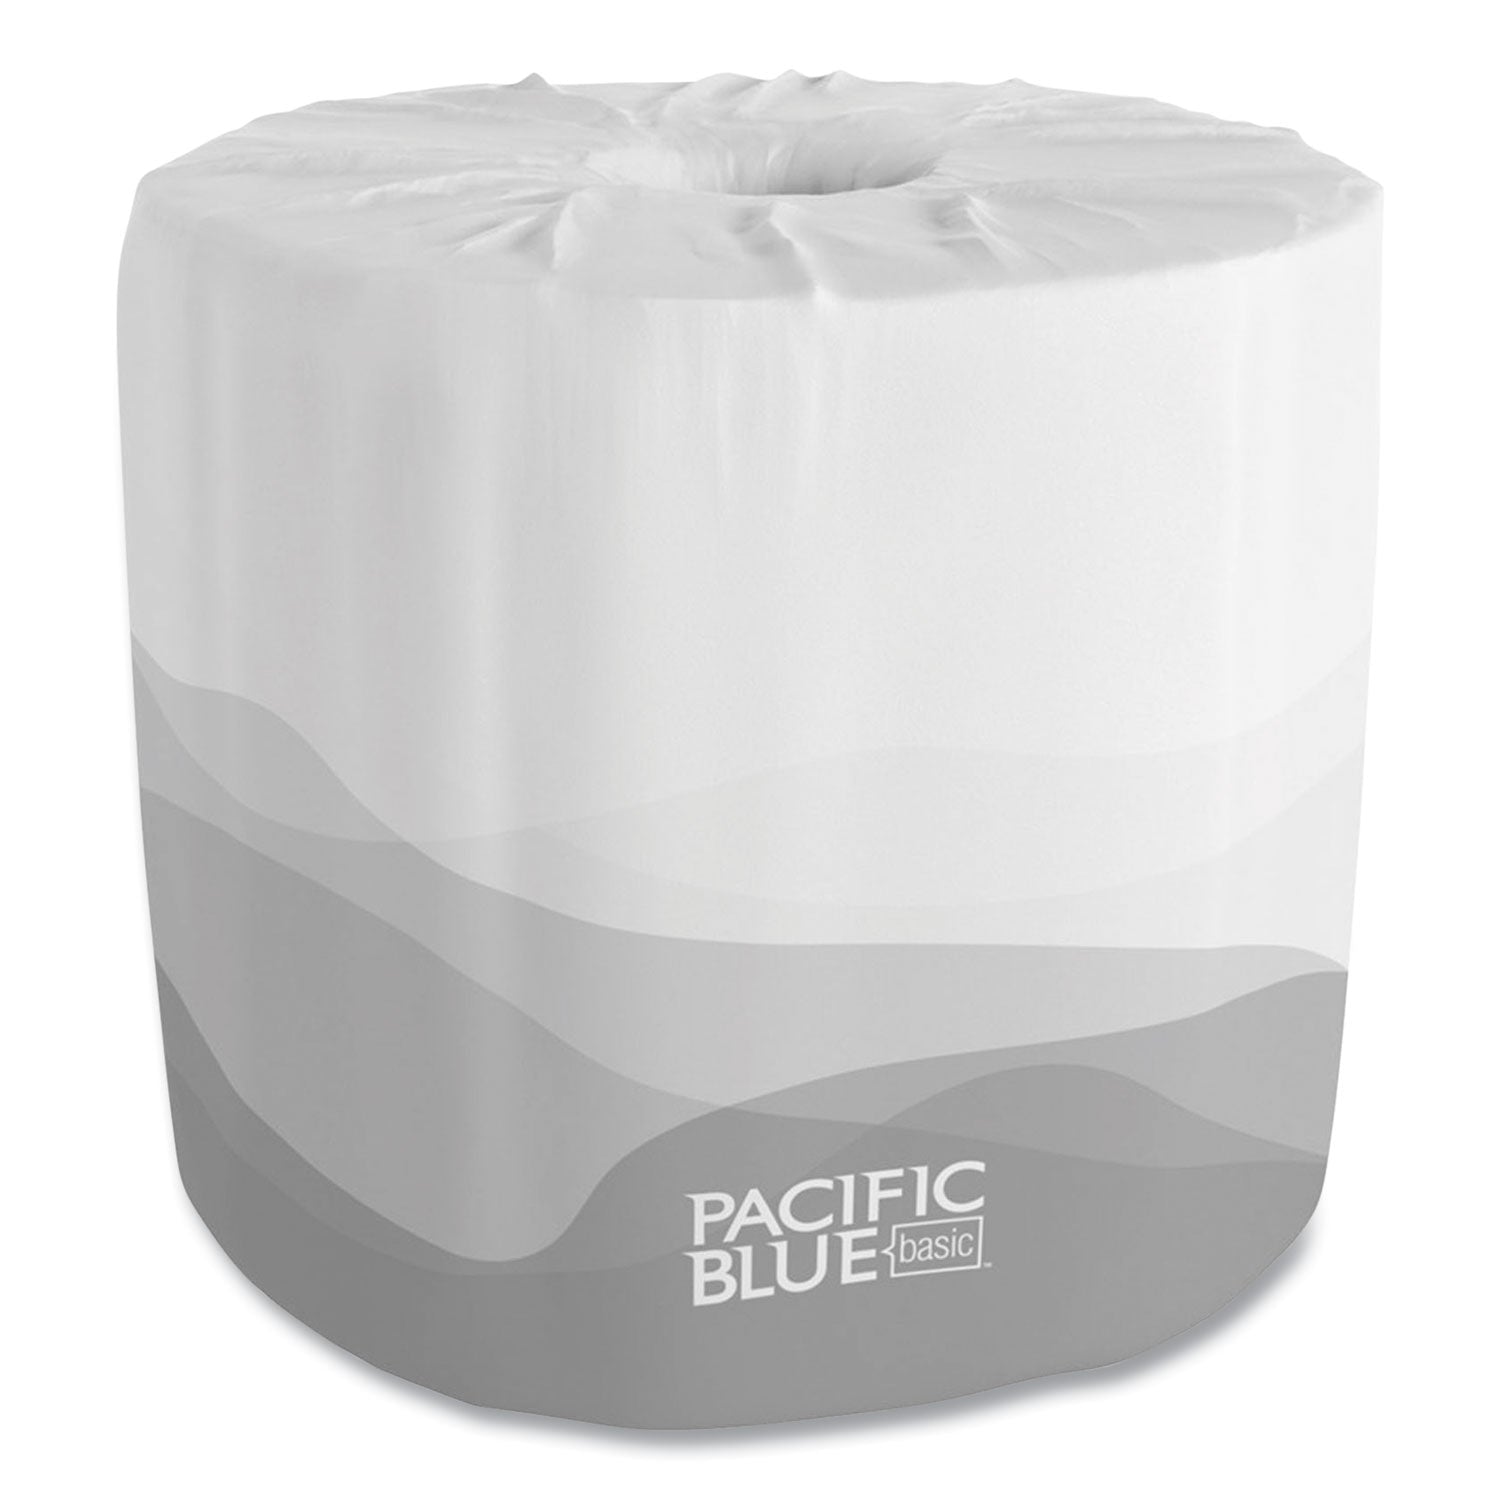 Pacific Blue Basic Bathroom Tissue, Septic Safe, 1-Ply, White, 1,210 Sheets/Roll, 80 Rolls/Carton - 